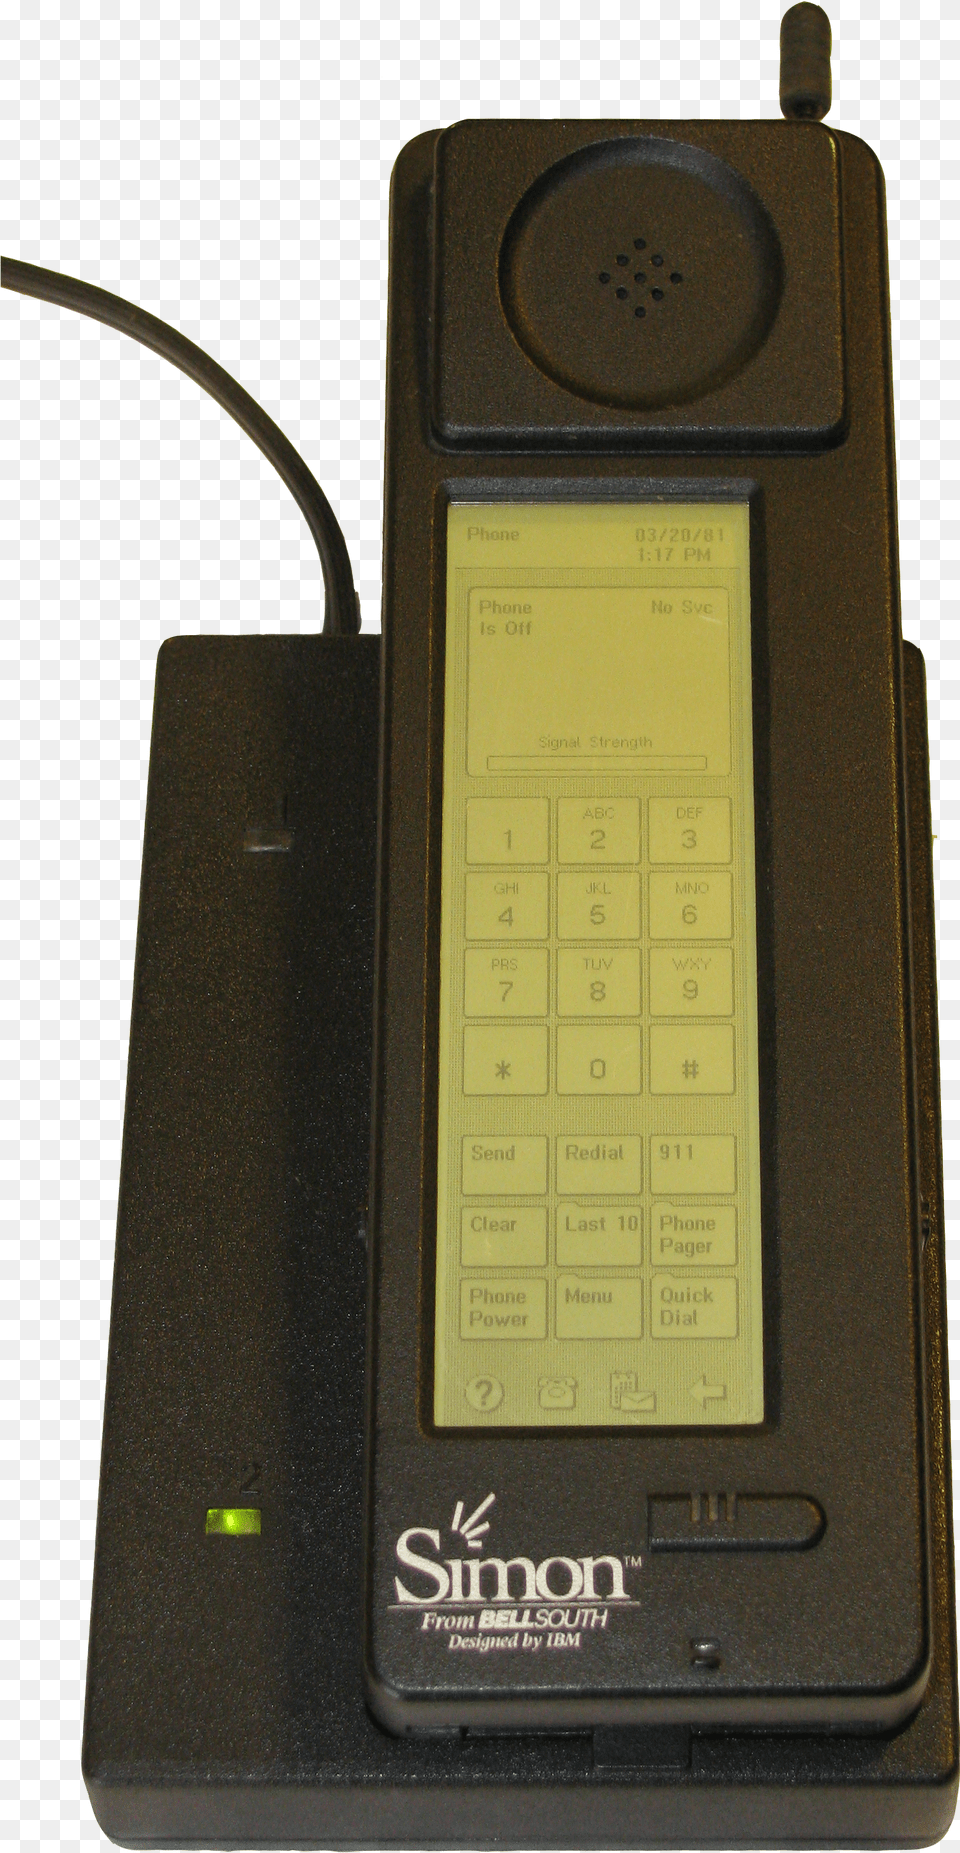 Photograph Of The Simon Personal Communicator Shown Png Image